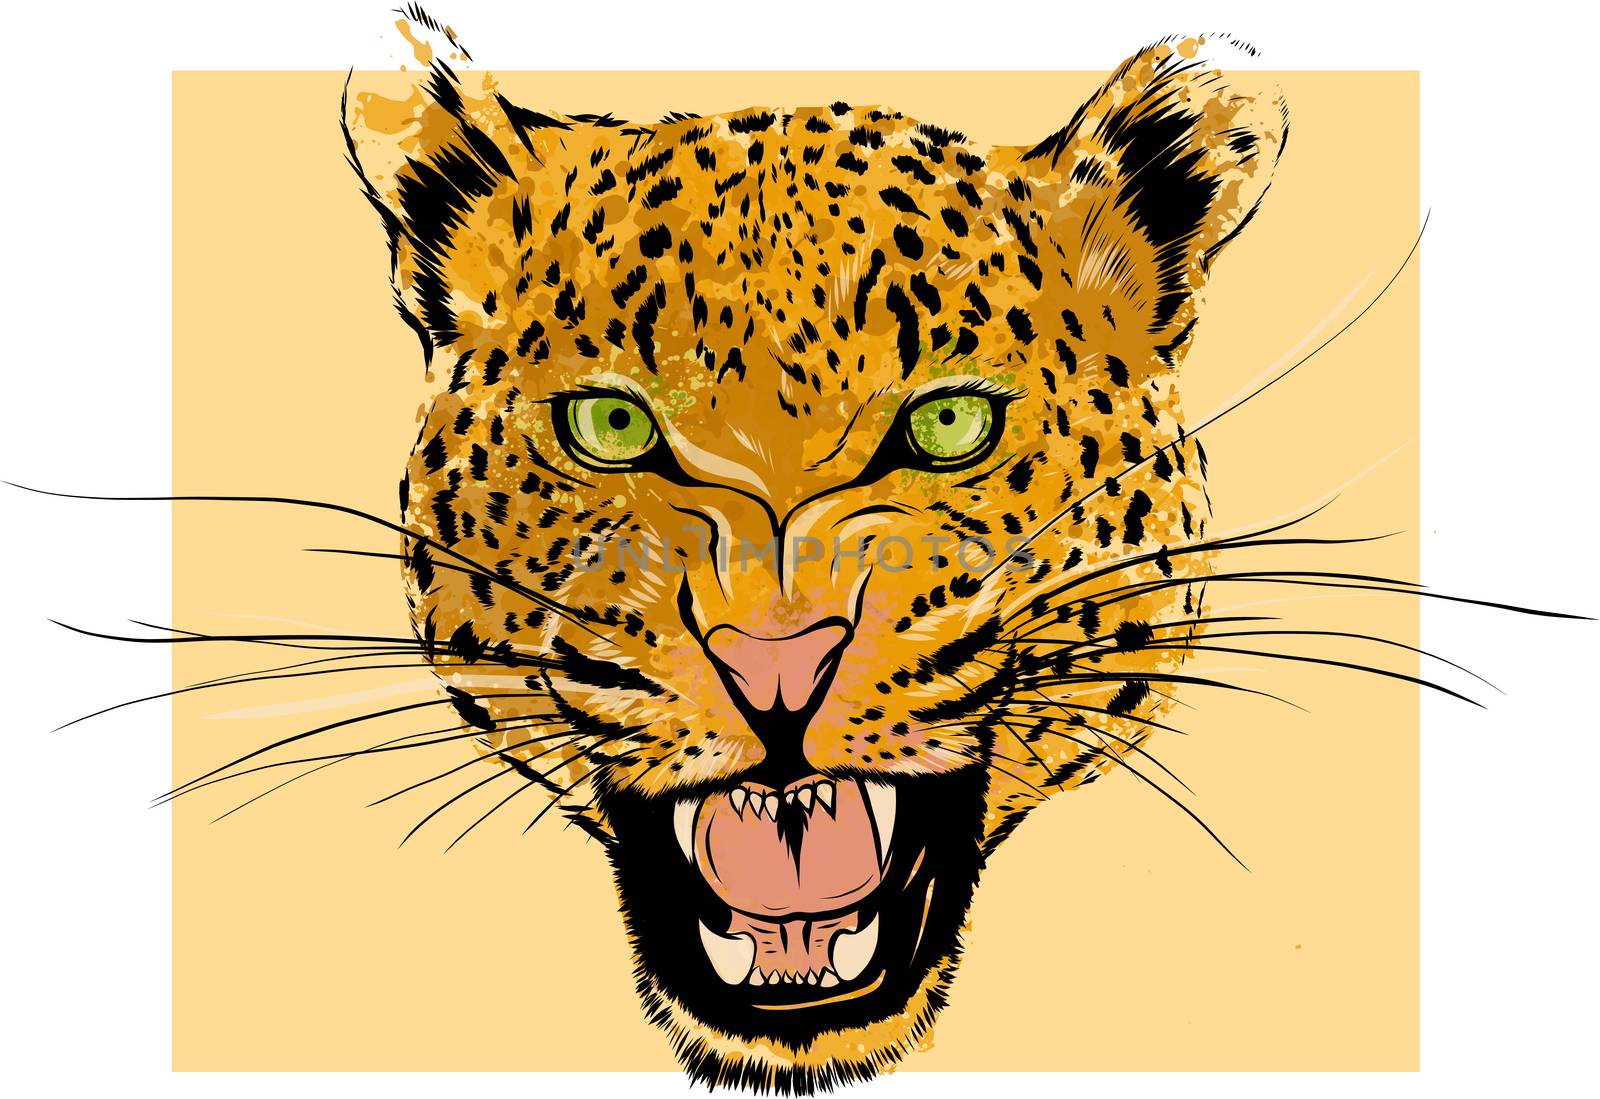 Leopard Portrait. Angry wild big cat head. Cute face of African Aggressive predator with bared teeth in cartoon style, t-shirt print design